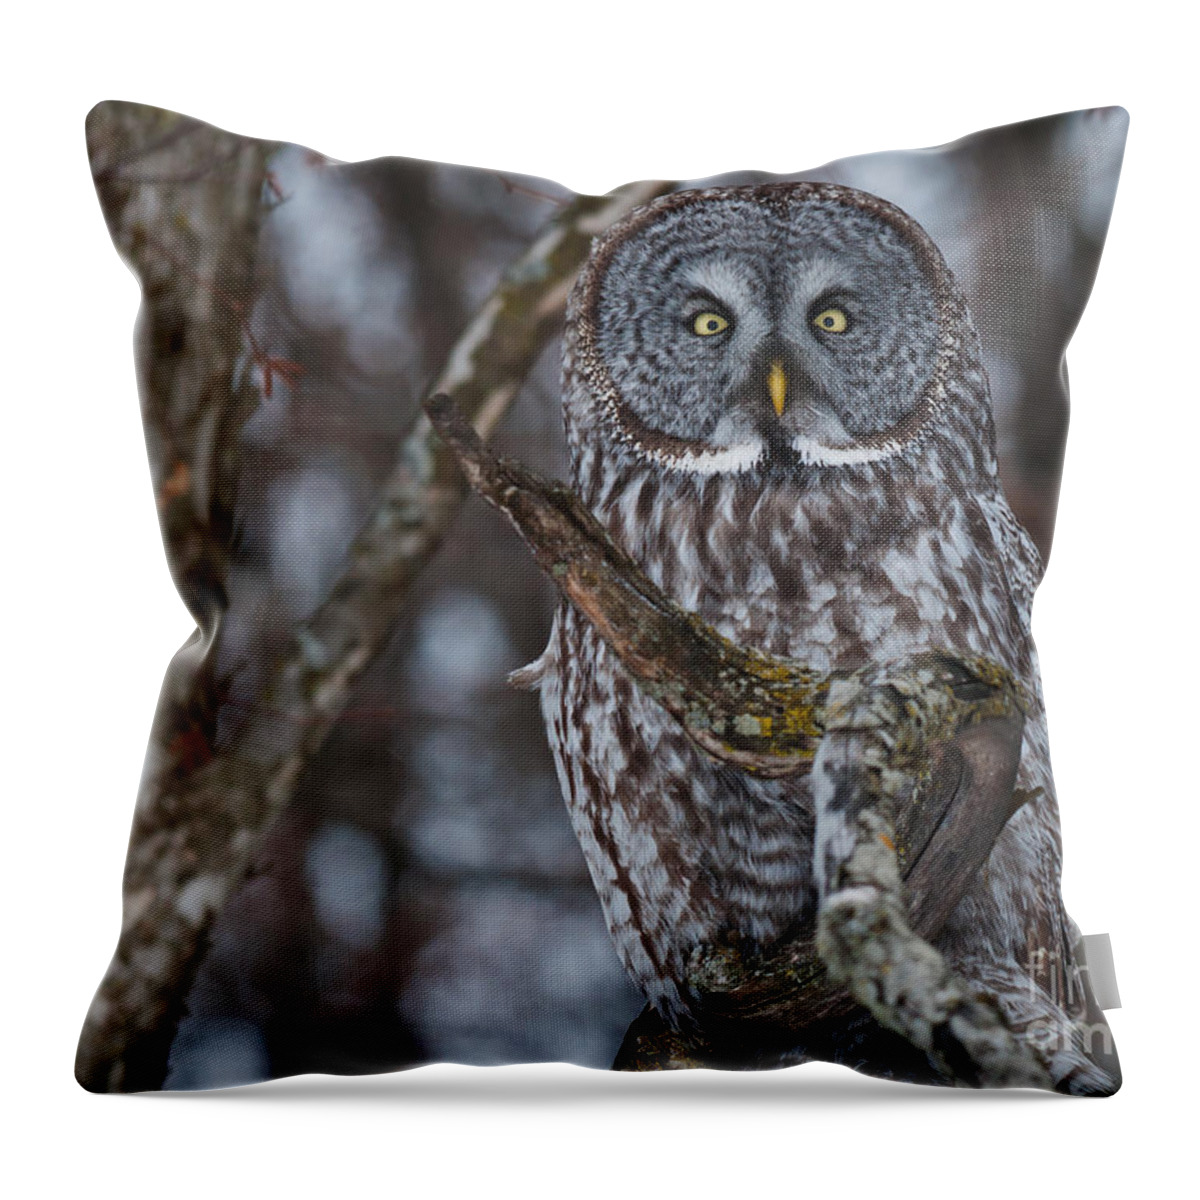  Throw Pillow featuring the photograph Great Gray Owl by Cheryl Baxter